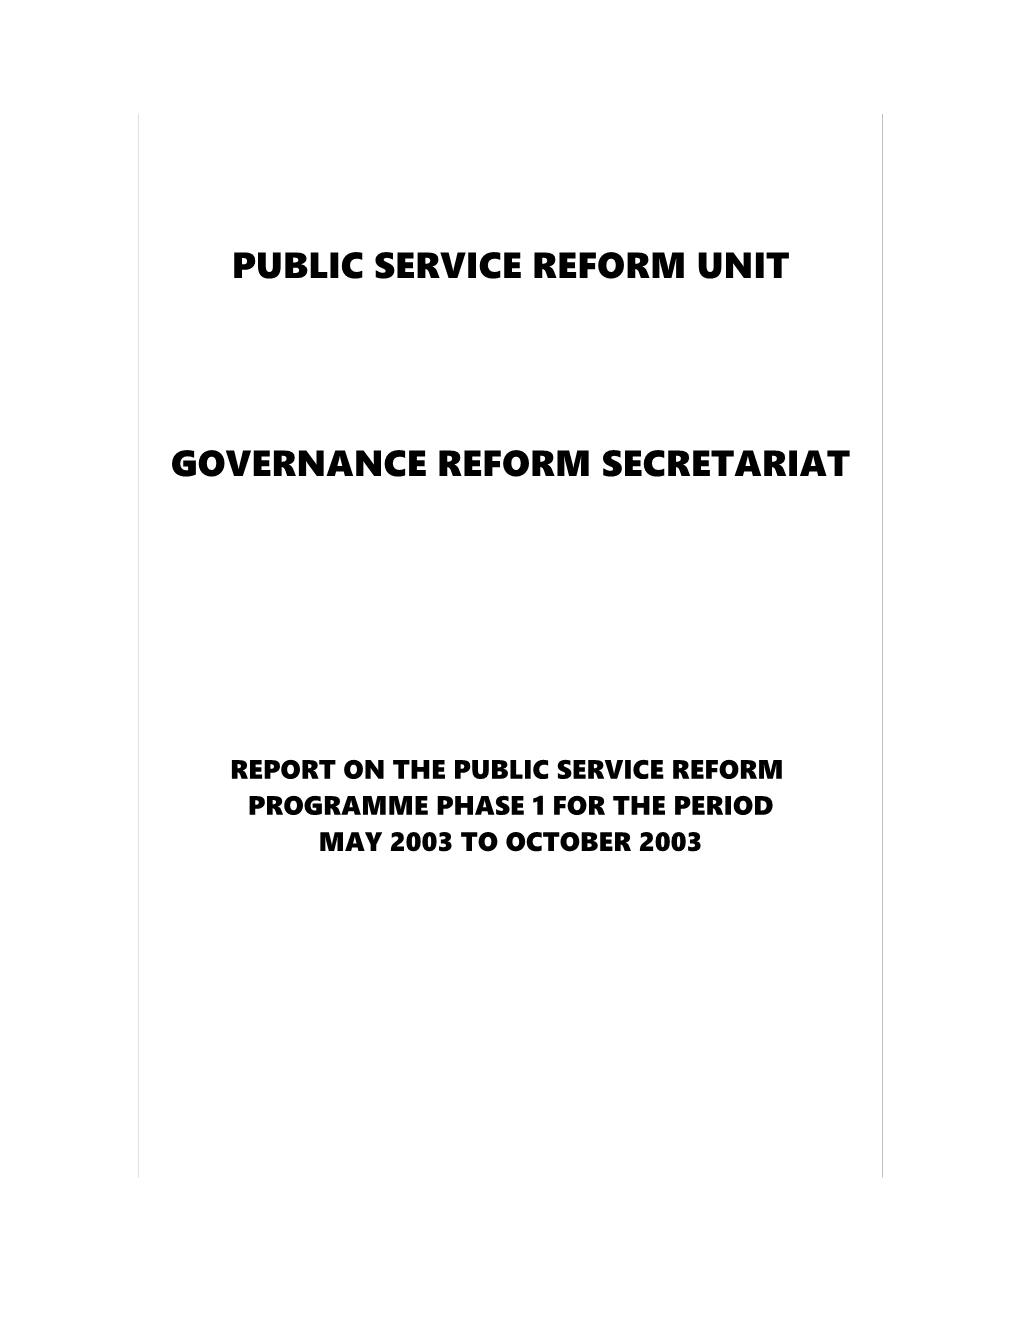 Report on the Public Service Reform Programme Phase L for the Period May to October 2003